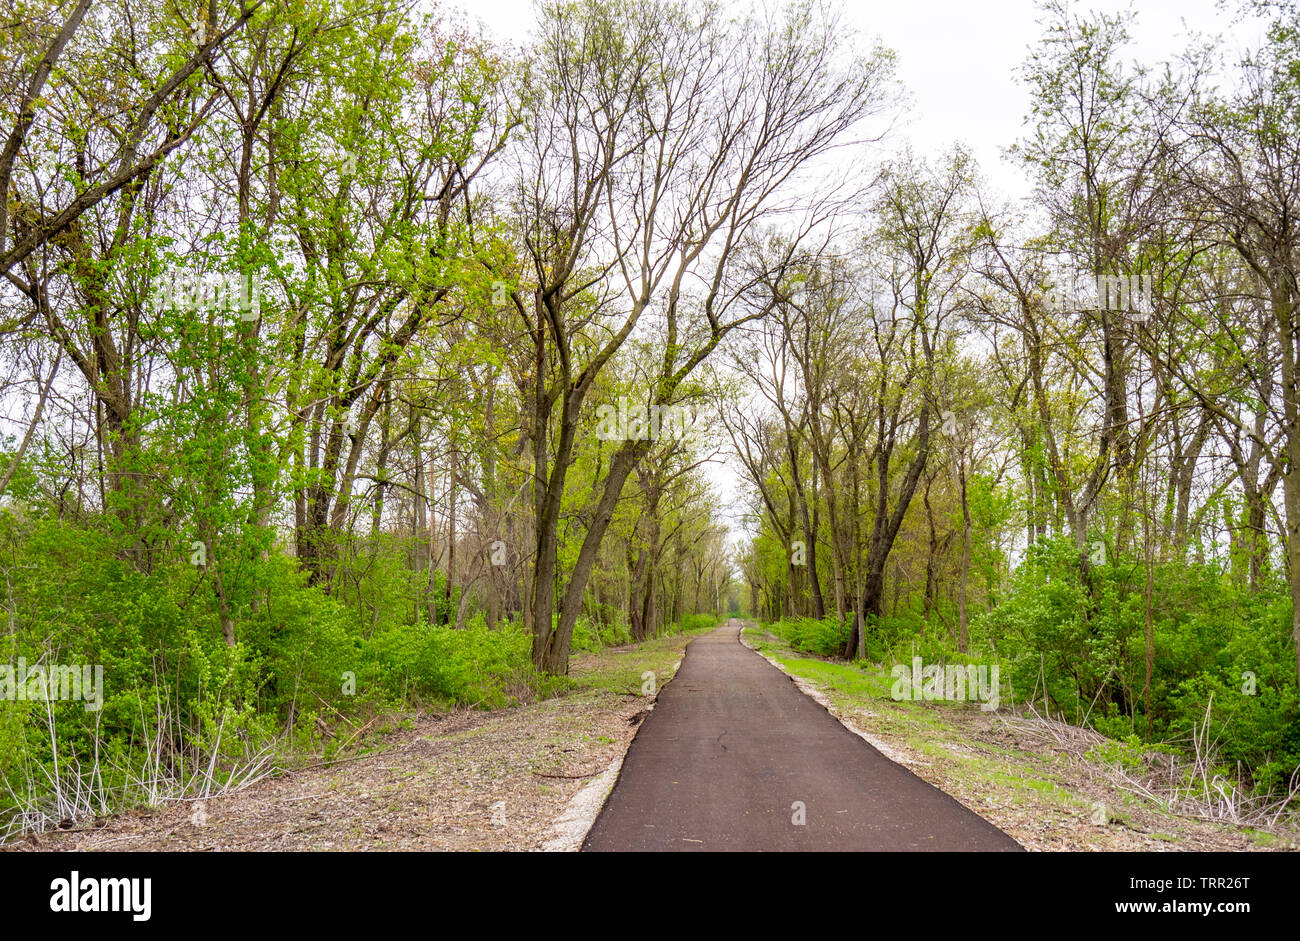 Rail trail, a new bike path running through rural Midwest Collinsville Illinois USA. Stock Photo